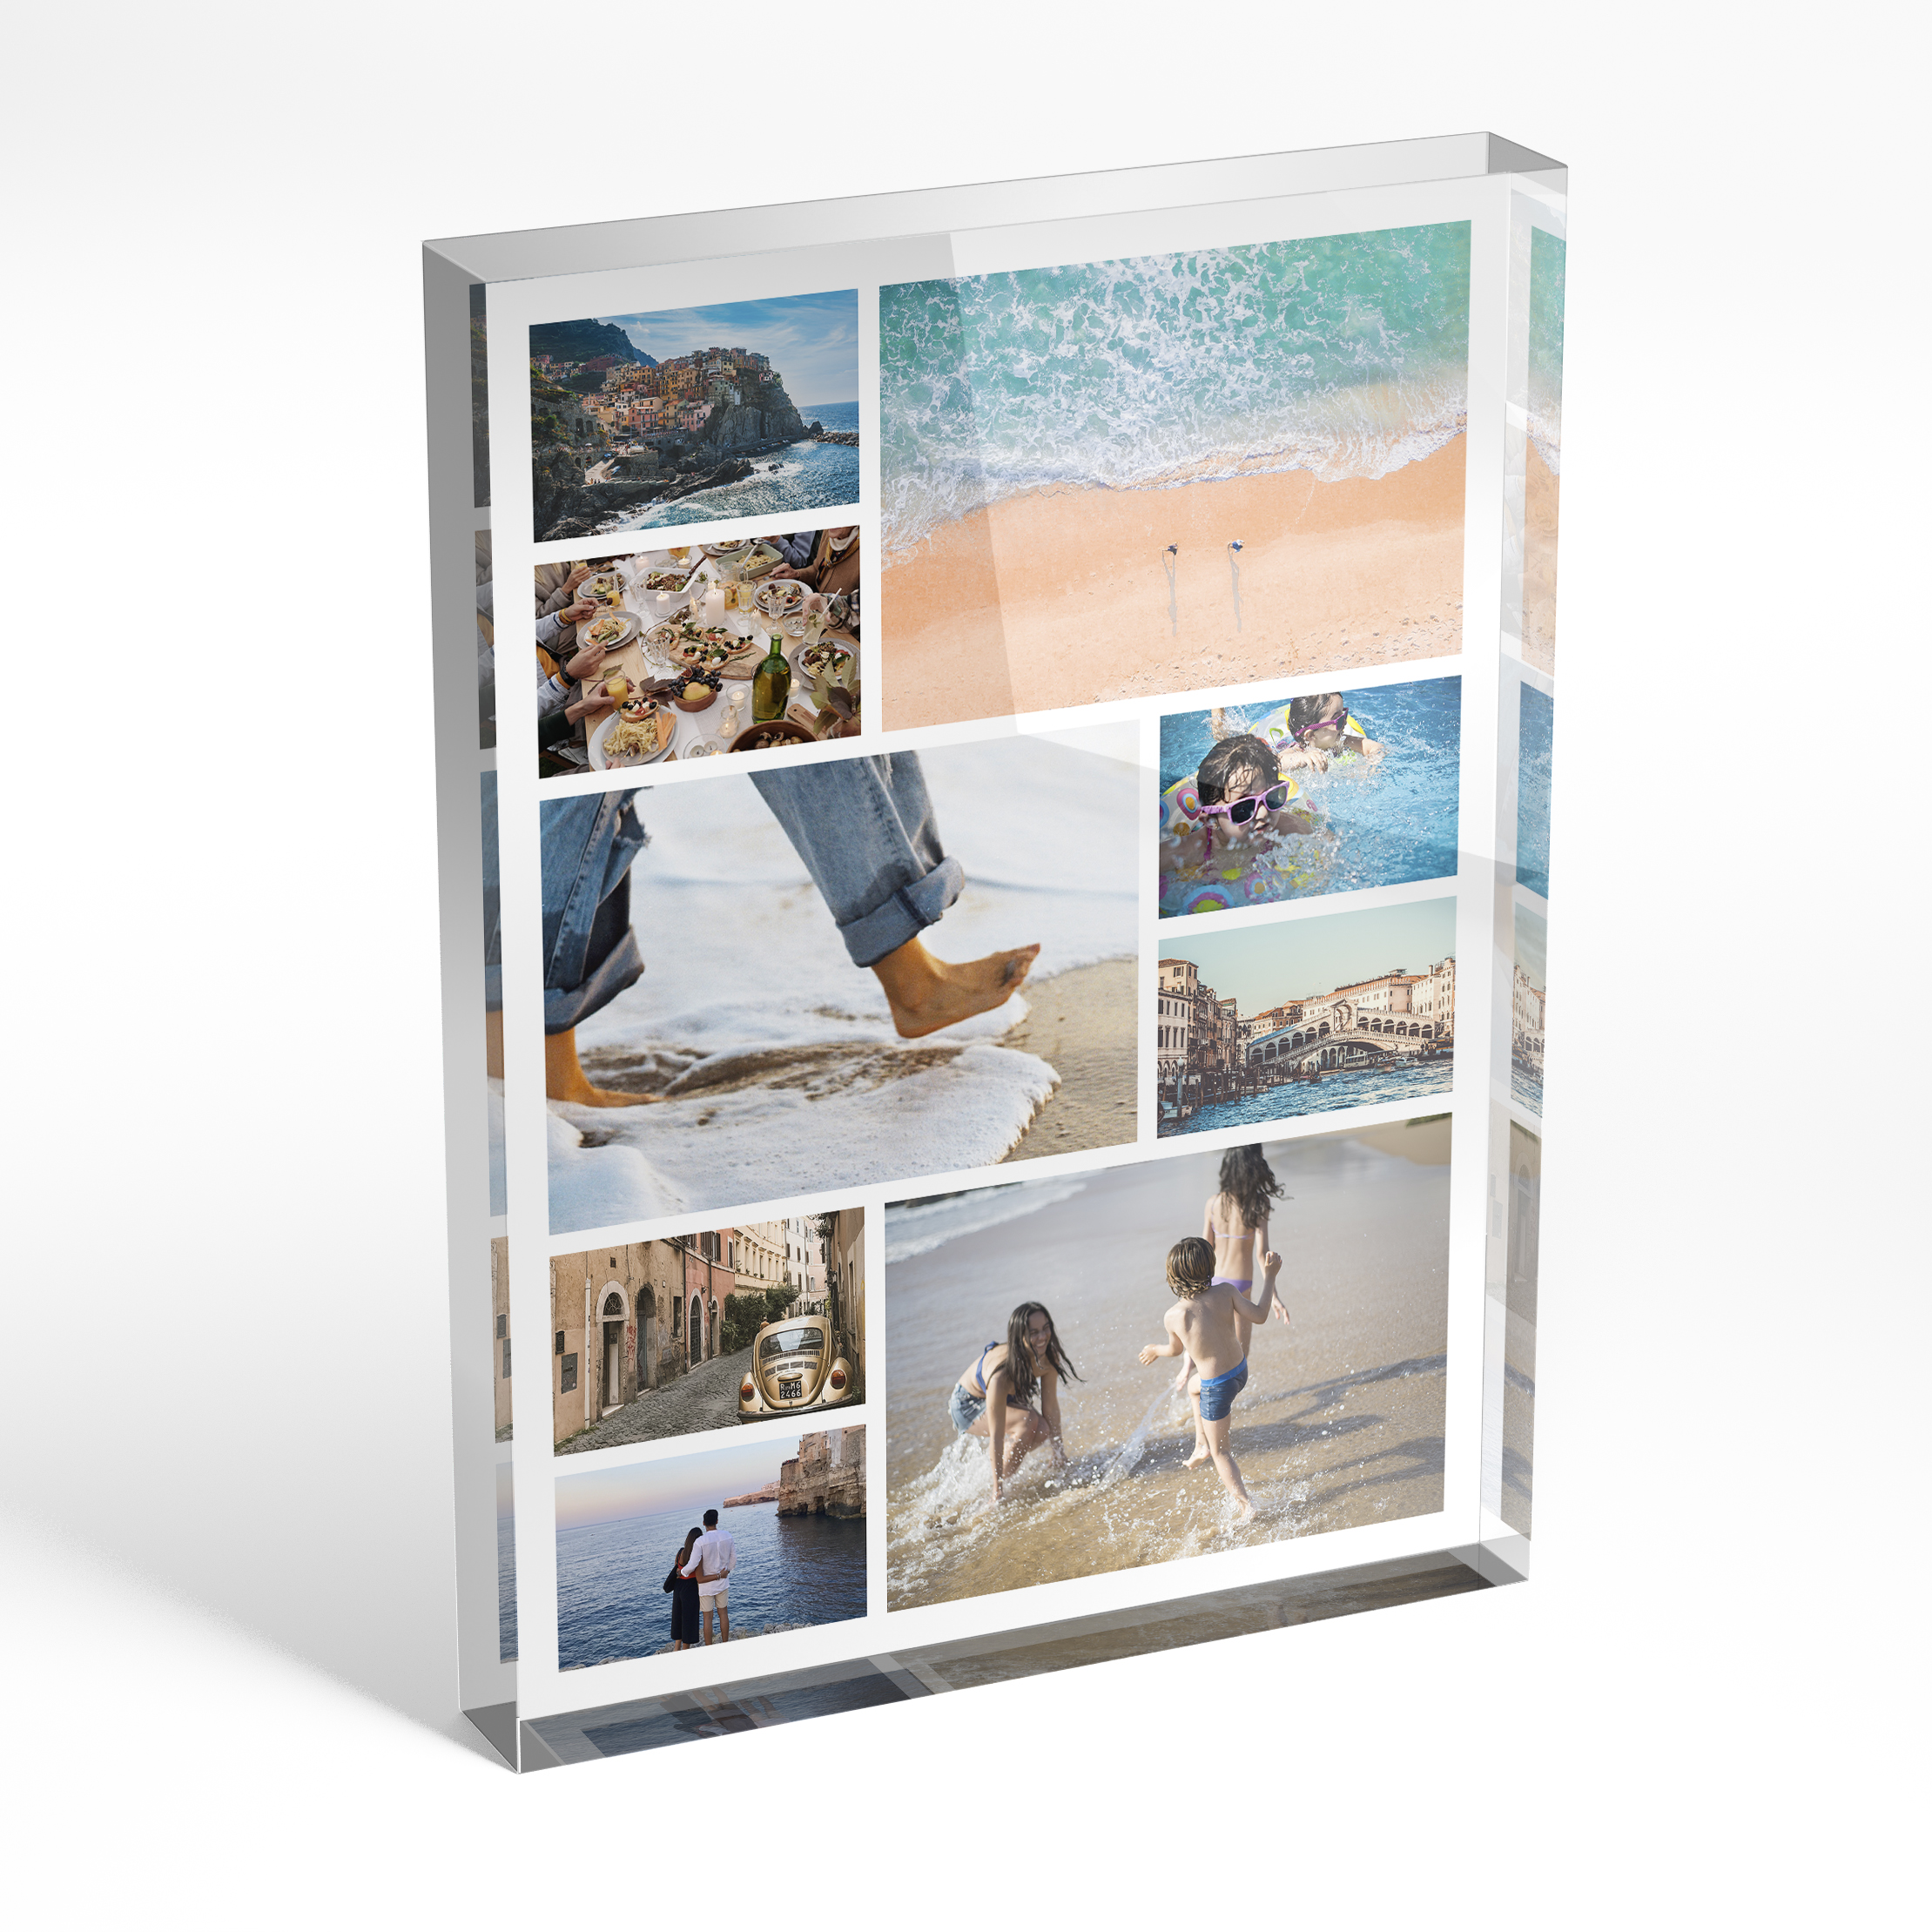 An angled side view of a portrait layout Acrylic Glass Photo Block with space for 9 photos. Thiis design is named "Festive Harmony". 